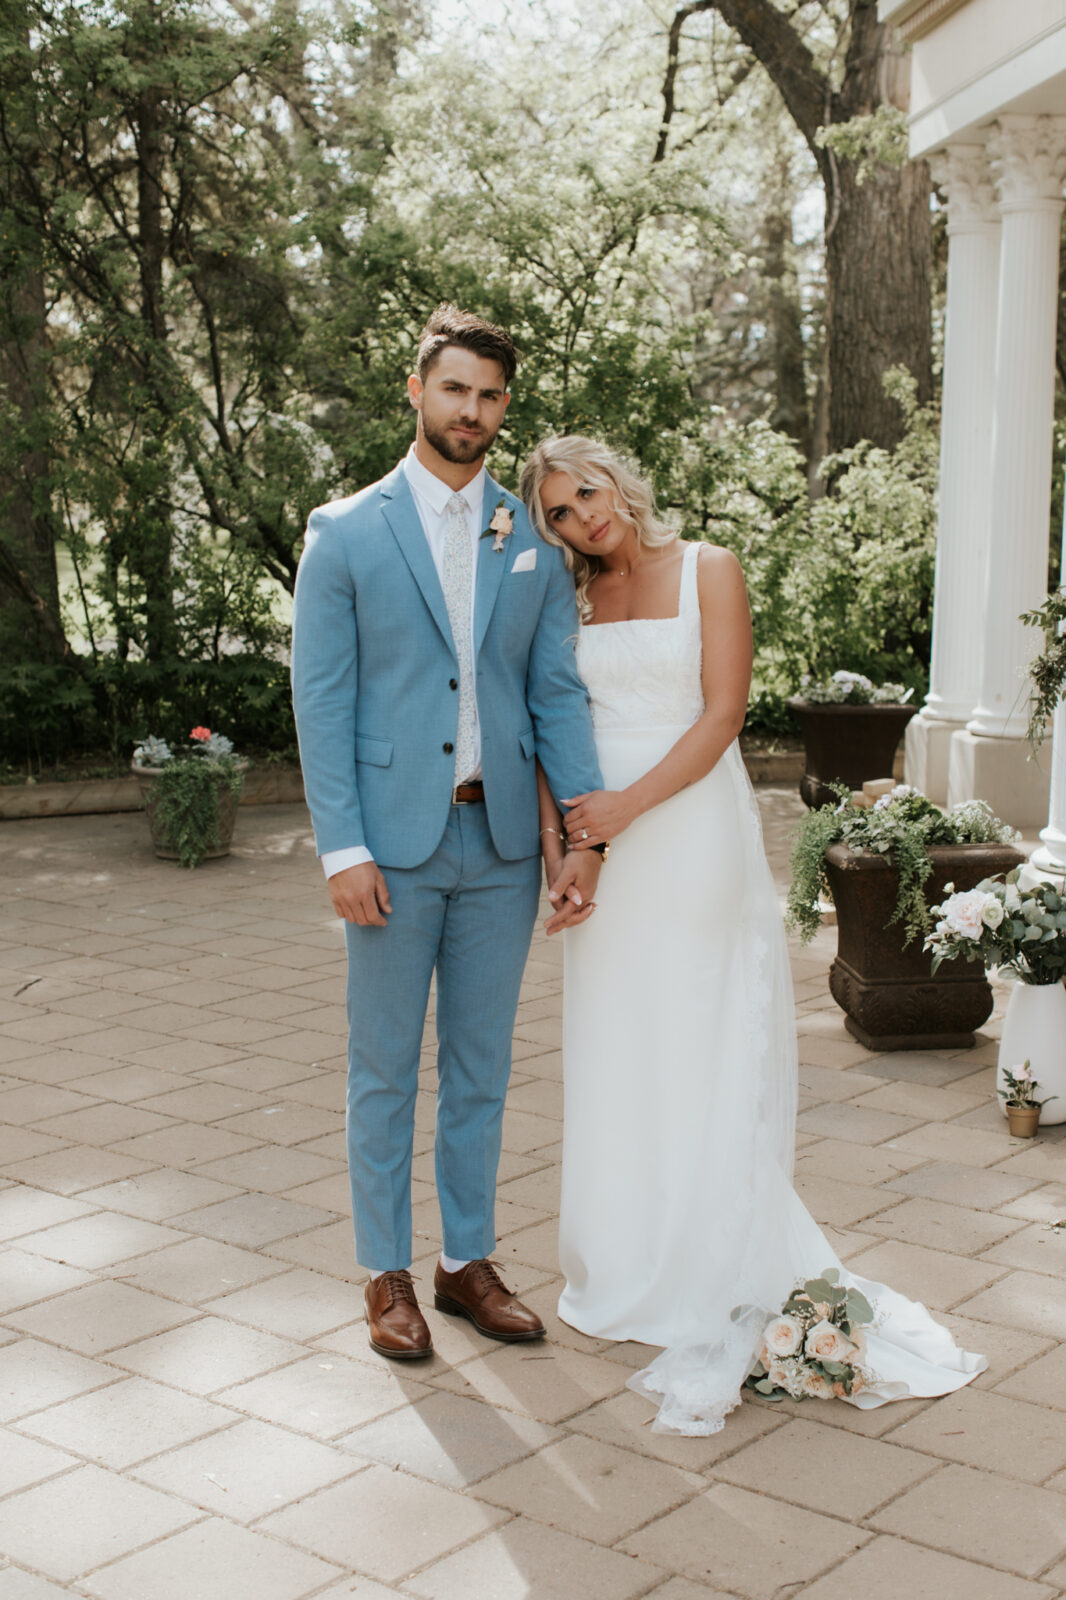 baby blue wedding, vintage meets classic wedding inspiration, summer wedding inspiration. This Lethbridge wedding at Norland Historic Estate features a sparkler exit, vintage blue suits, and an old-school getaway.
